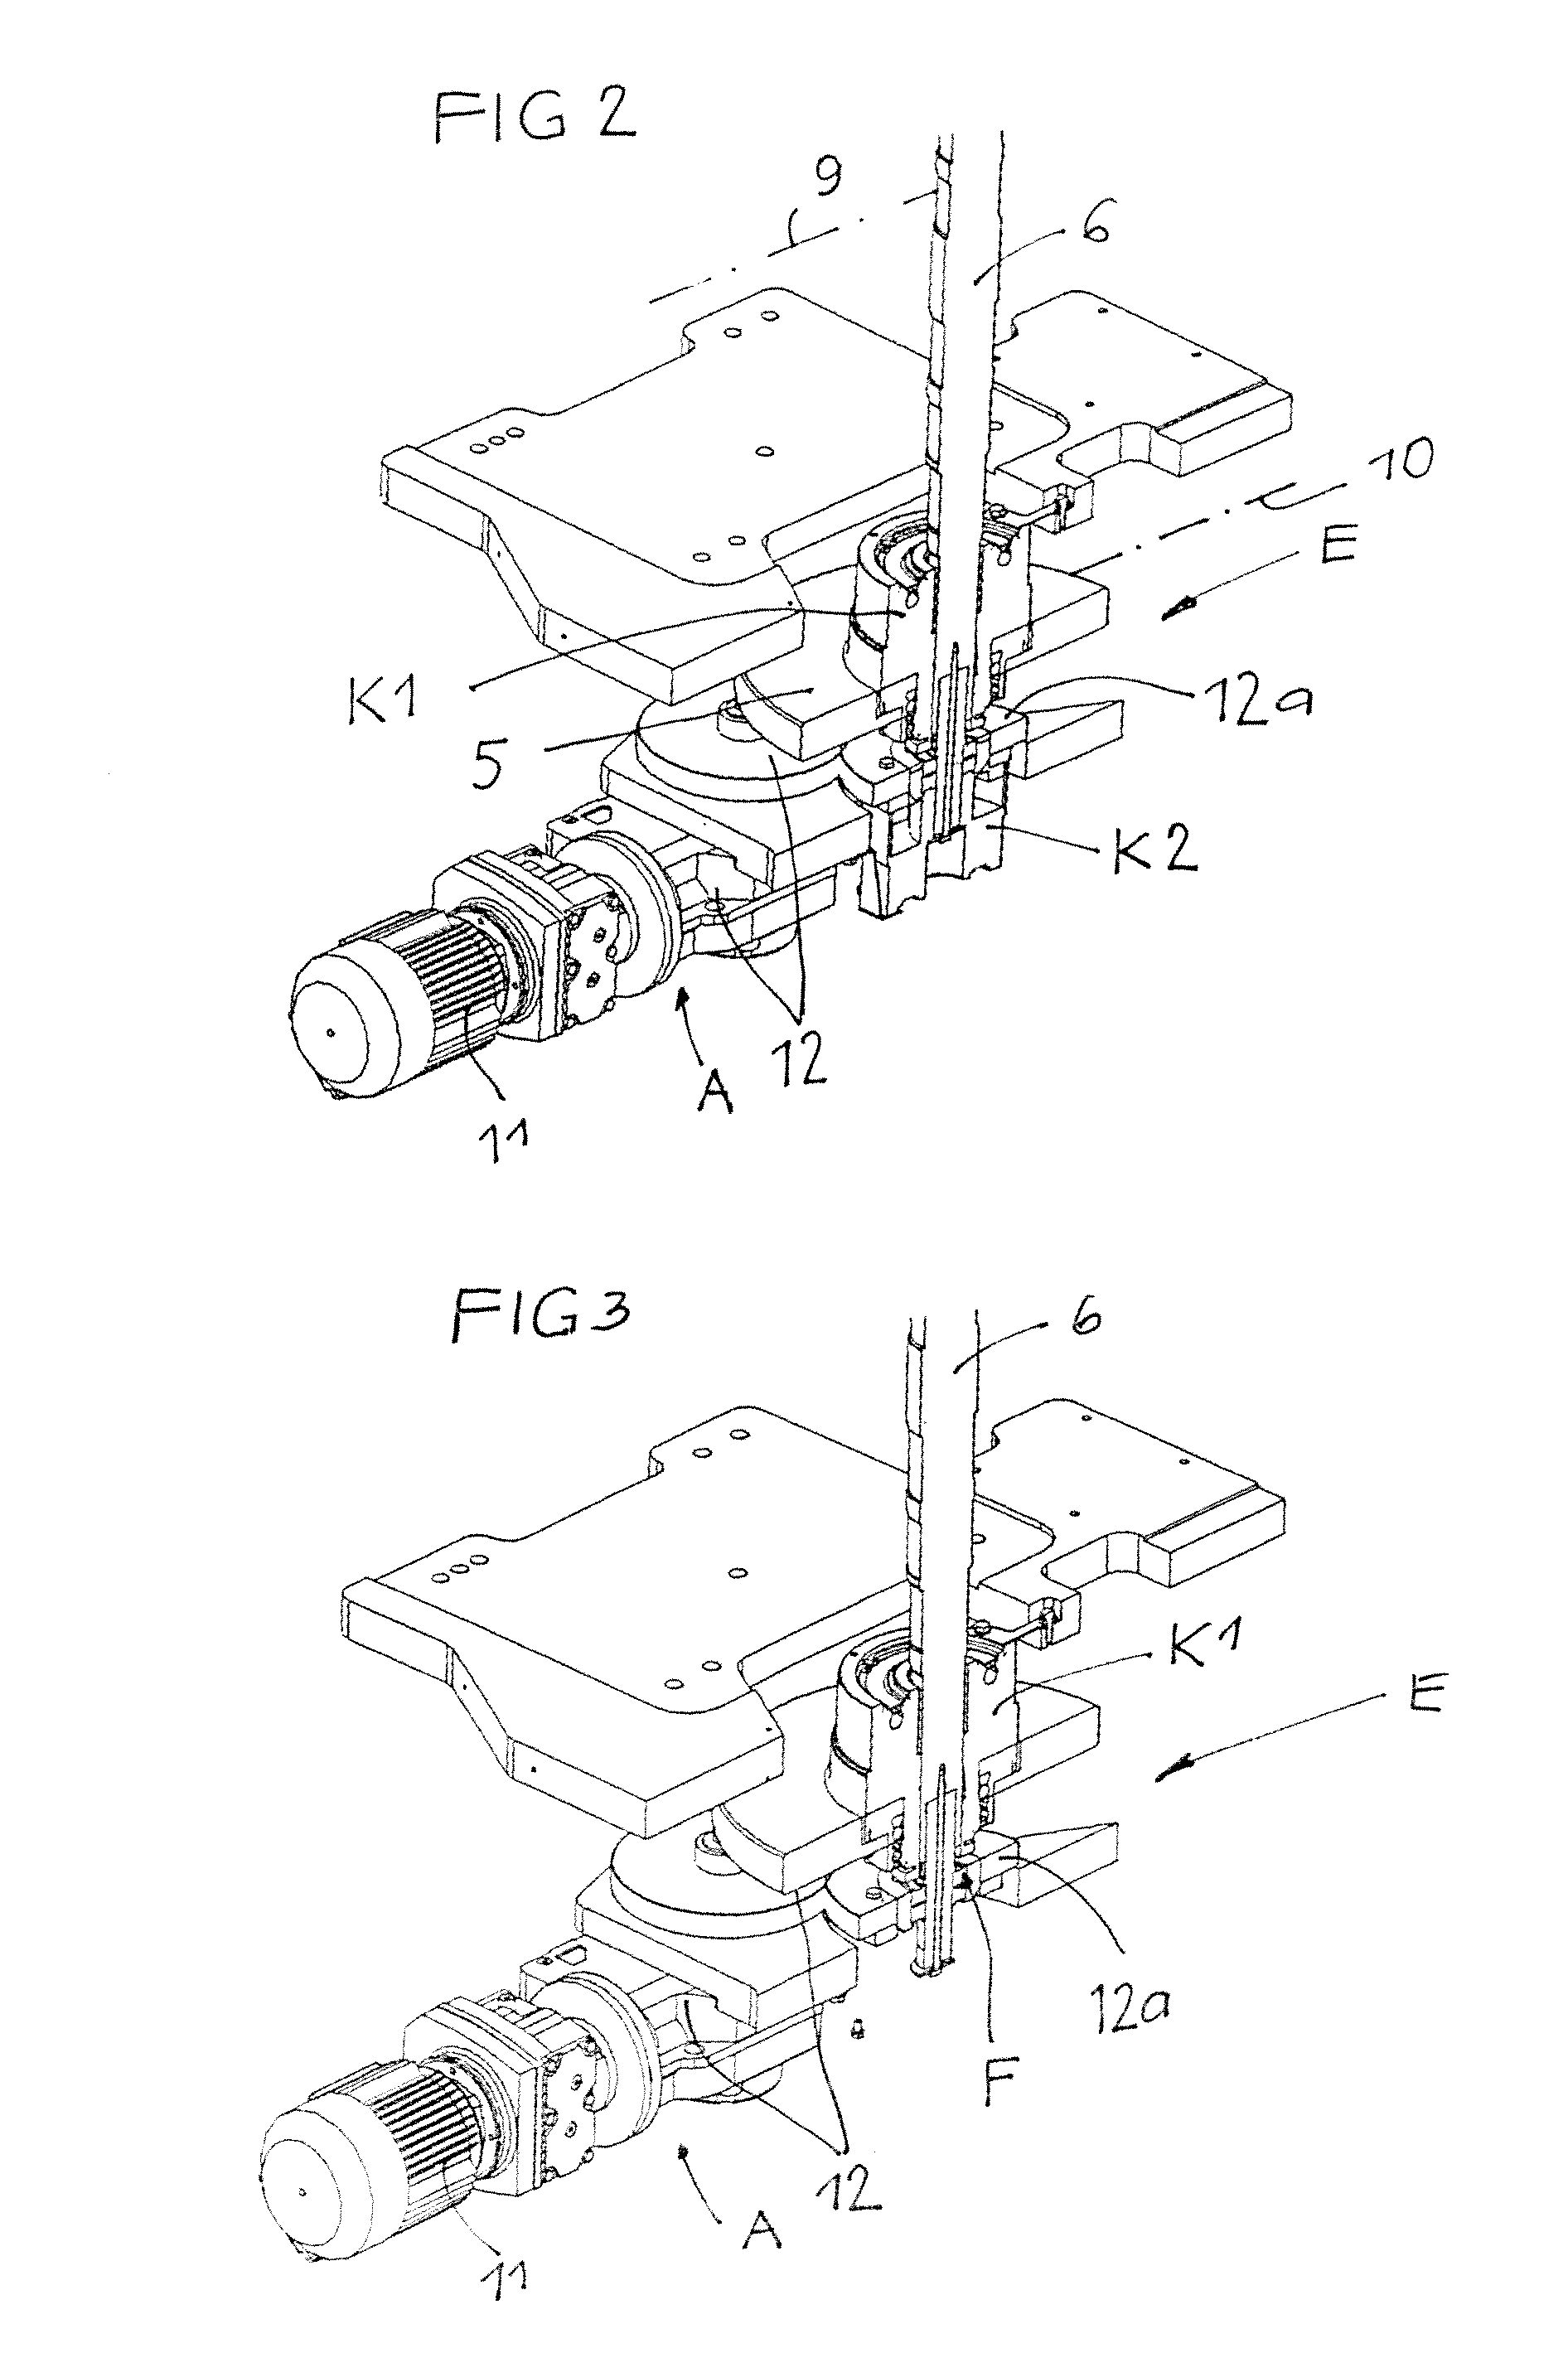 Machine for Forming Containers